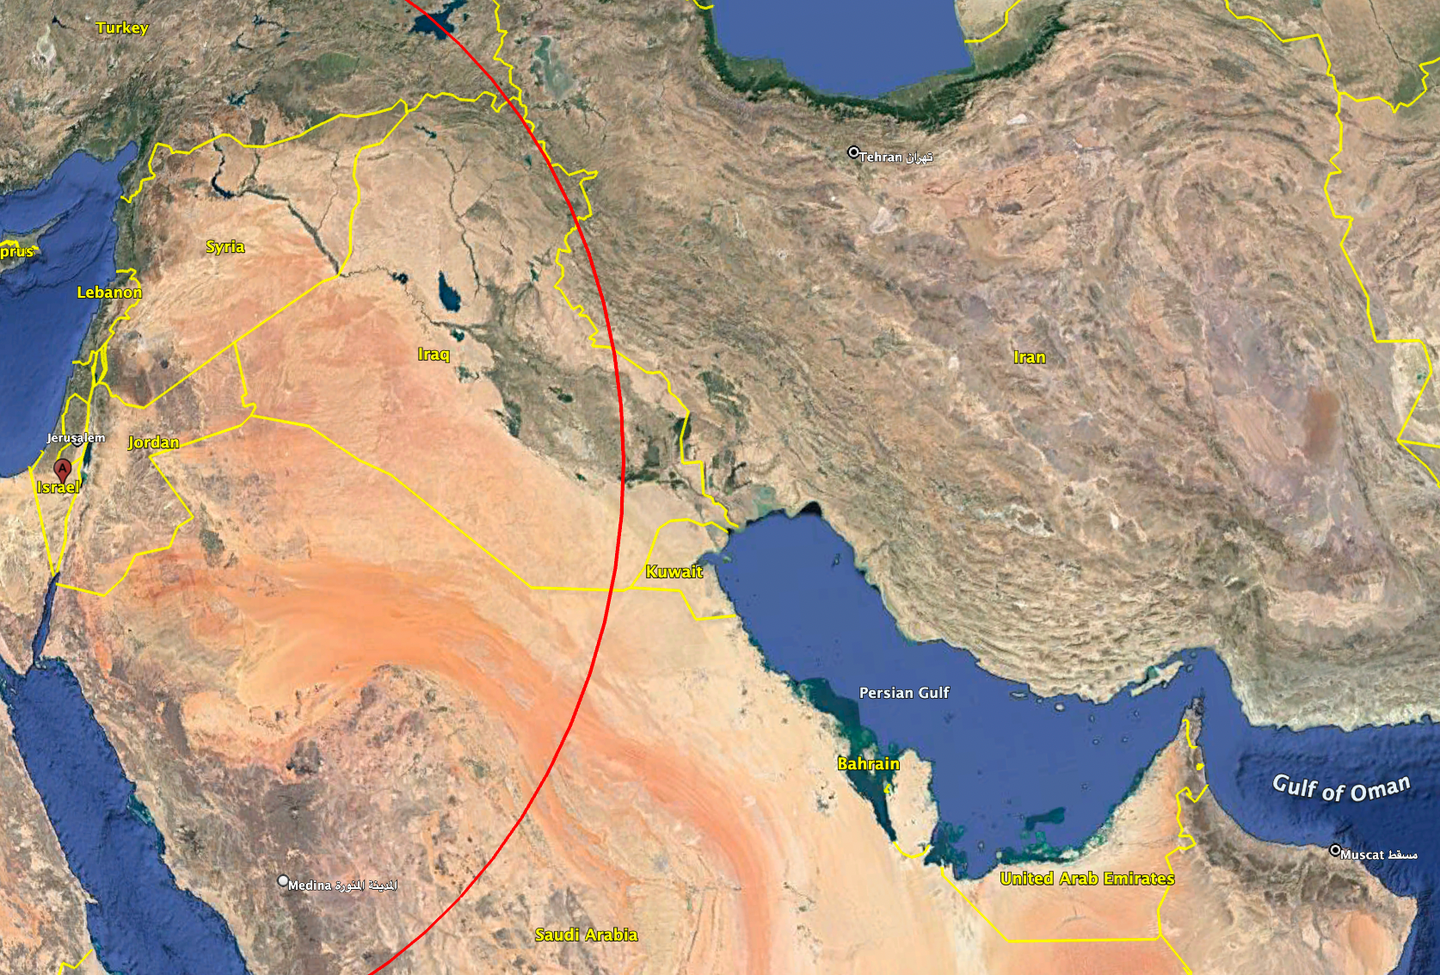 The 650-nautical-mile unrefueled radius of action widely attributed to the F-35A would not allow long-range strikes against Iranian targets. <em>Google Earth</em>